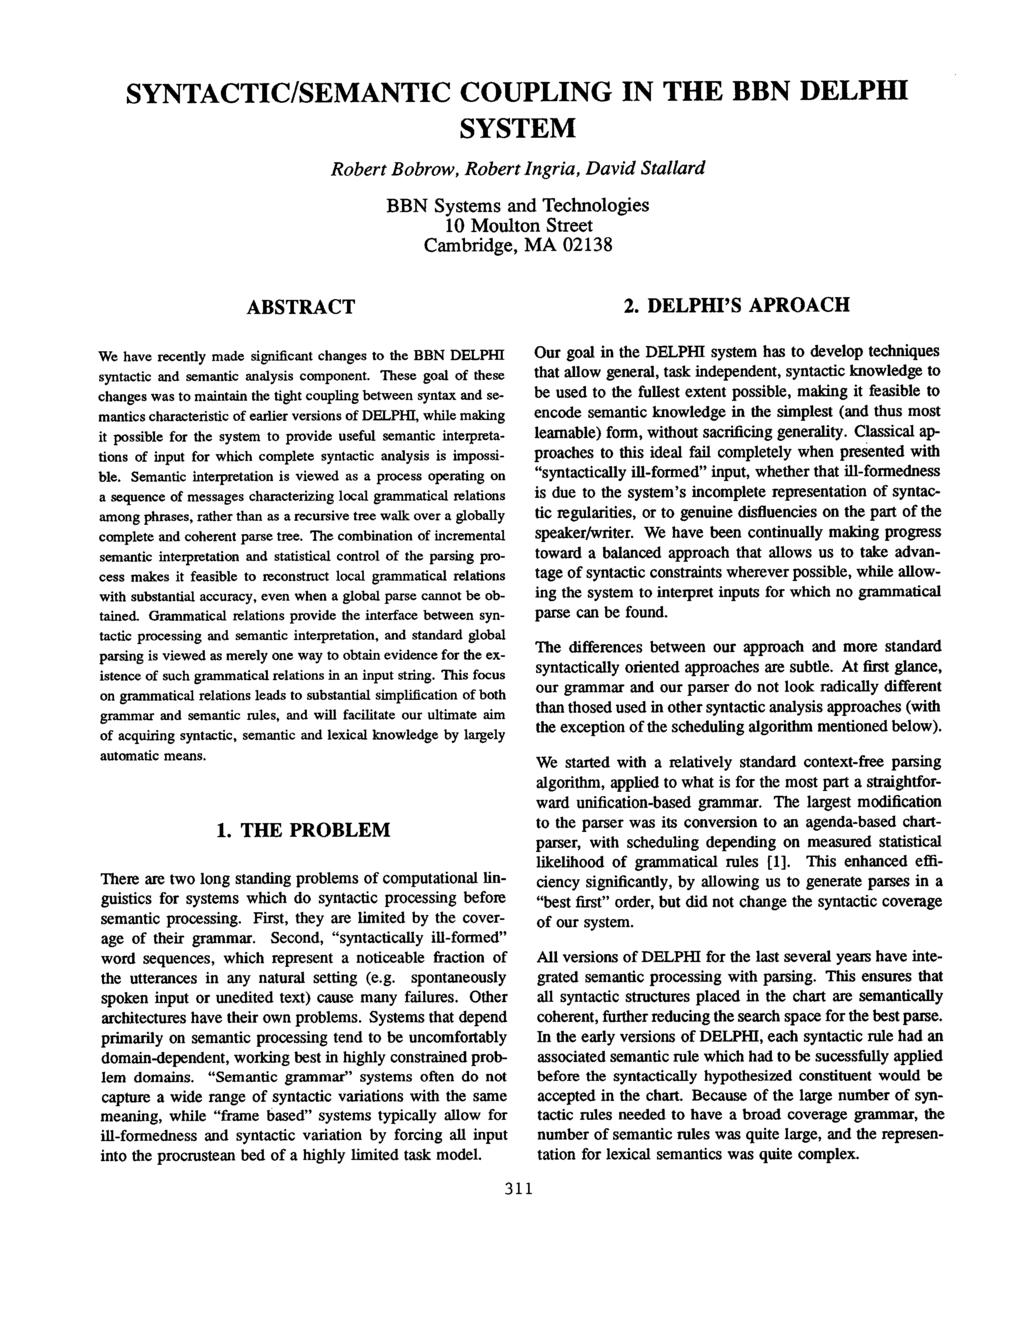 SYNTACTIC/SEMANTIC COUPLING IN THE BBN DELPHI SYSTEM Robert Bobrow, Robert Ingria, David Stallard BBN Systems and Technologies 10 Moulton Street Cambridge, MA 02138 ABSTRACT We have recently made